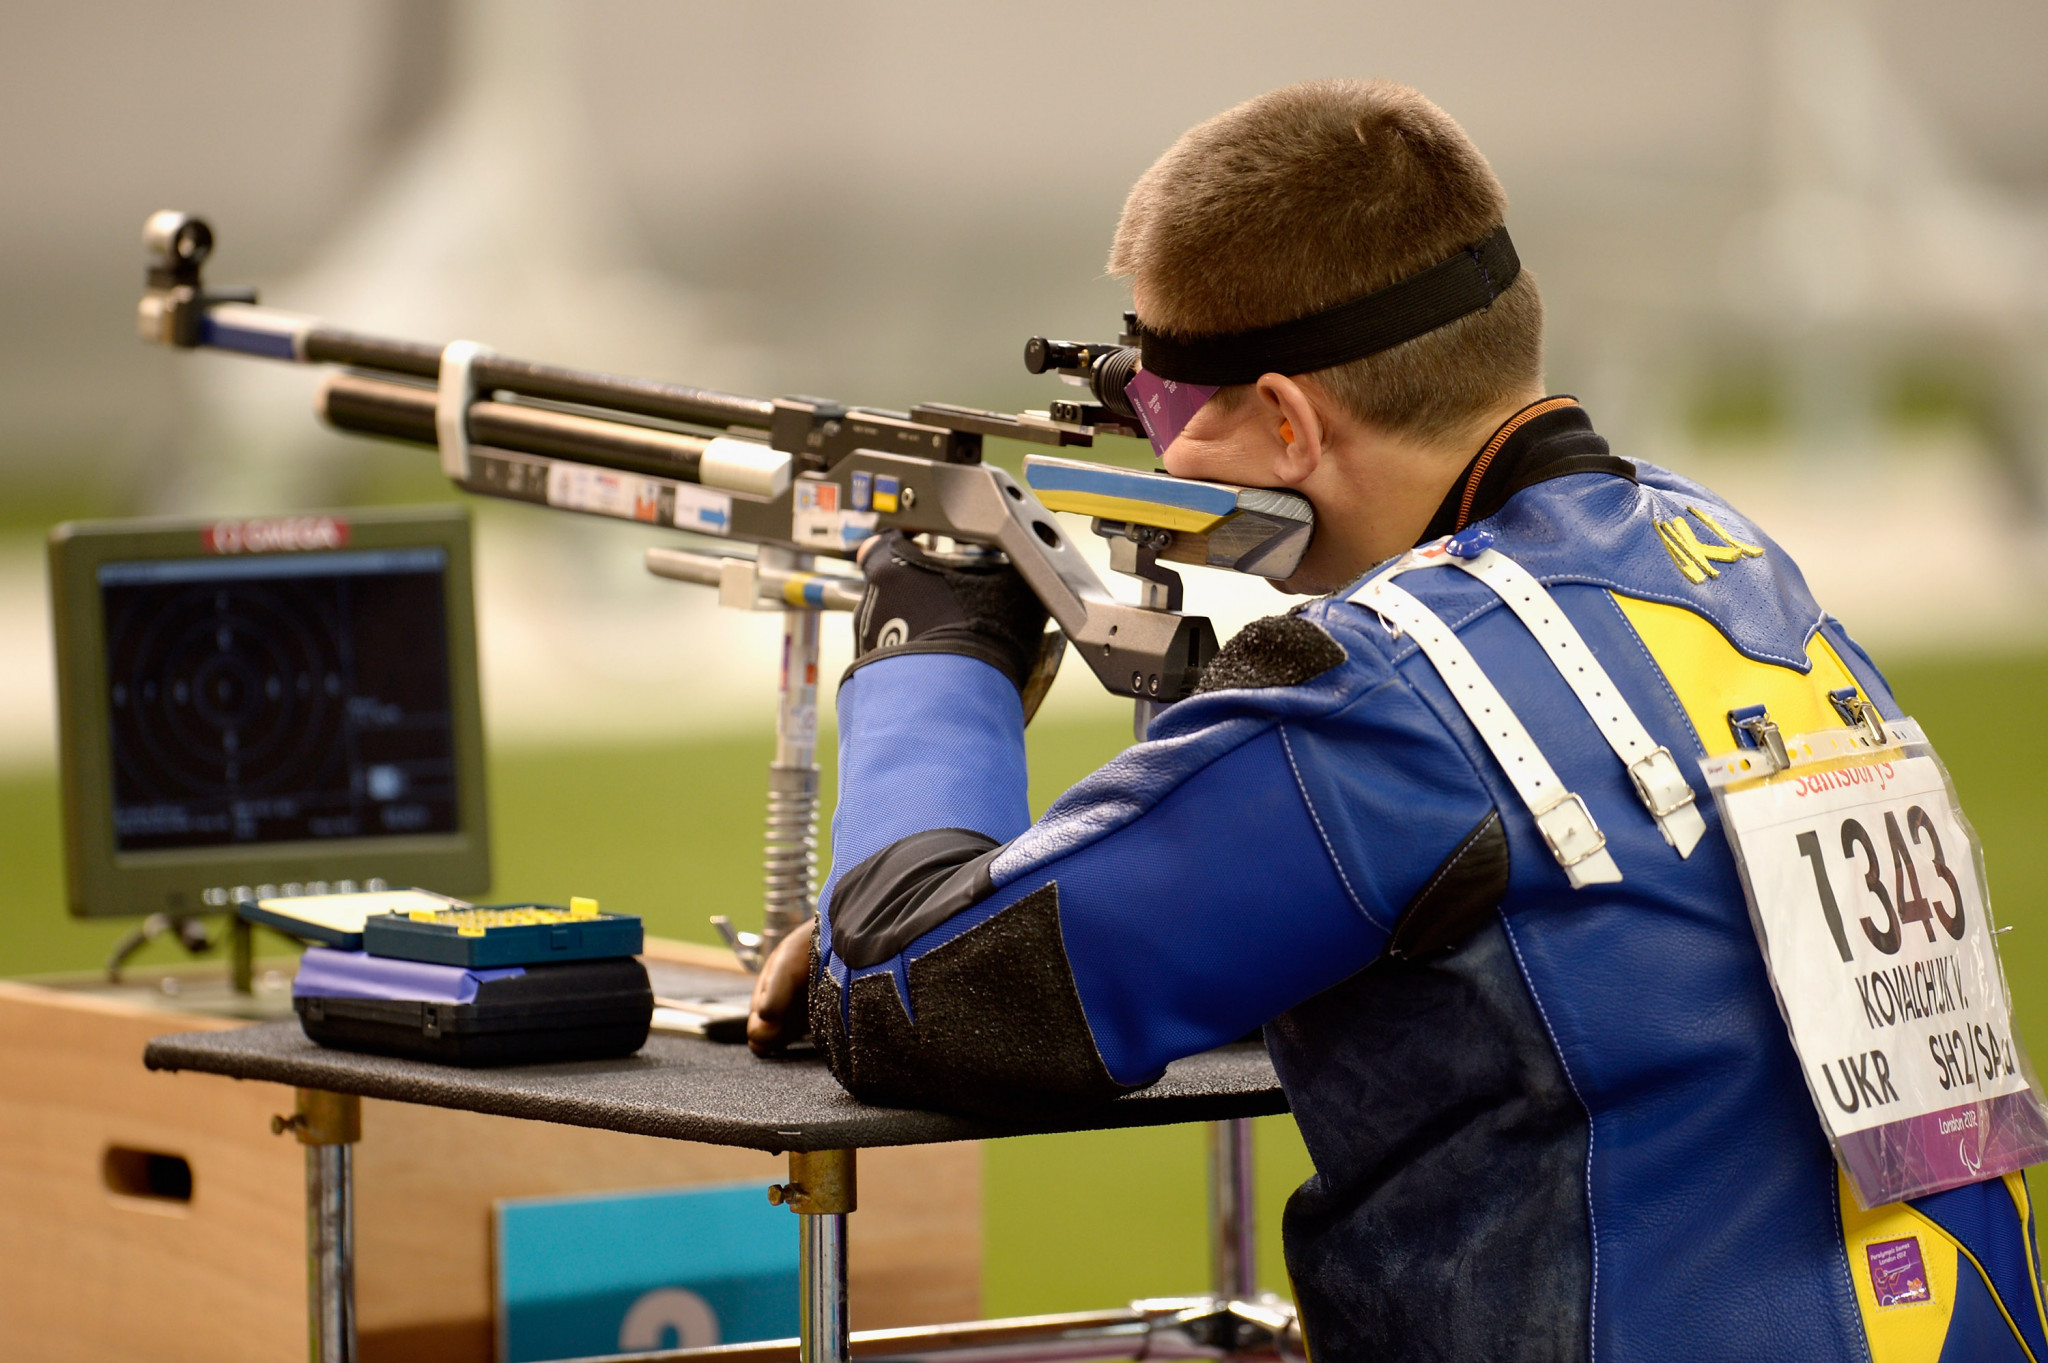 Double gold for Ukraine at Para Shooting World Cup